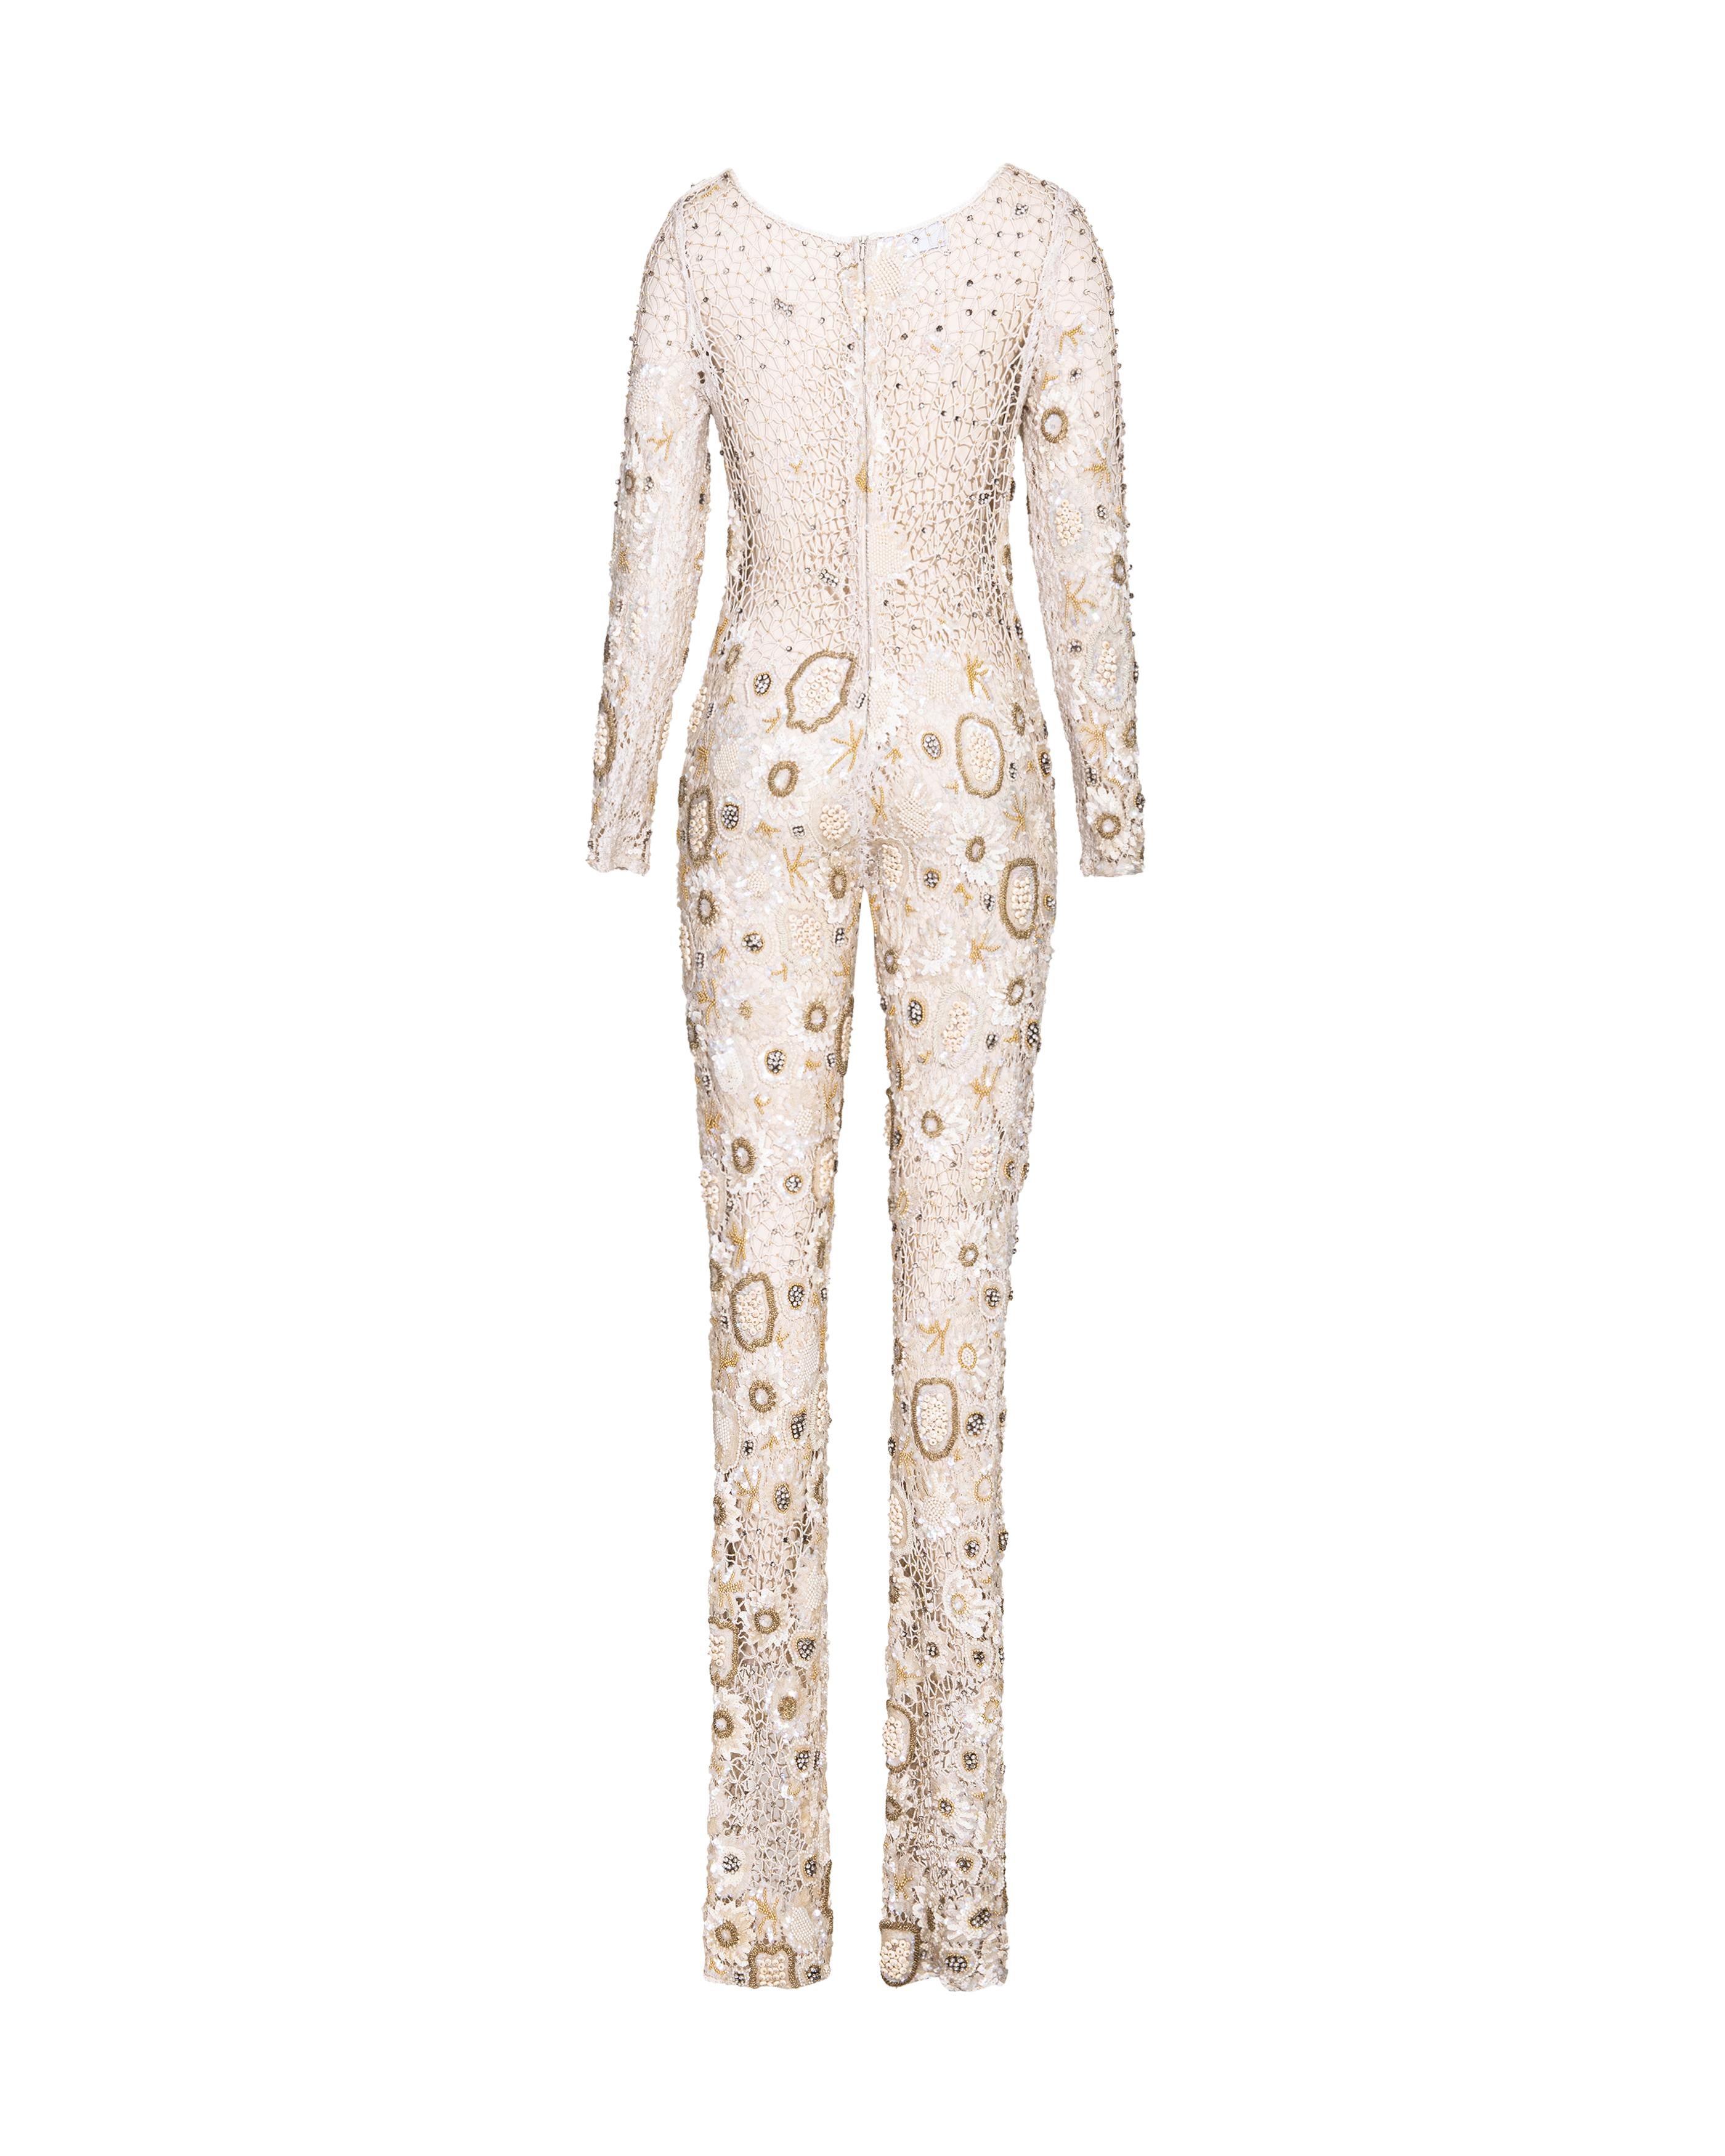 A/W 1994 Louis Feraud Haute Couture Embellished Embroidered Floral Jumpsuit For Sale 1